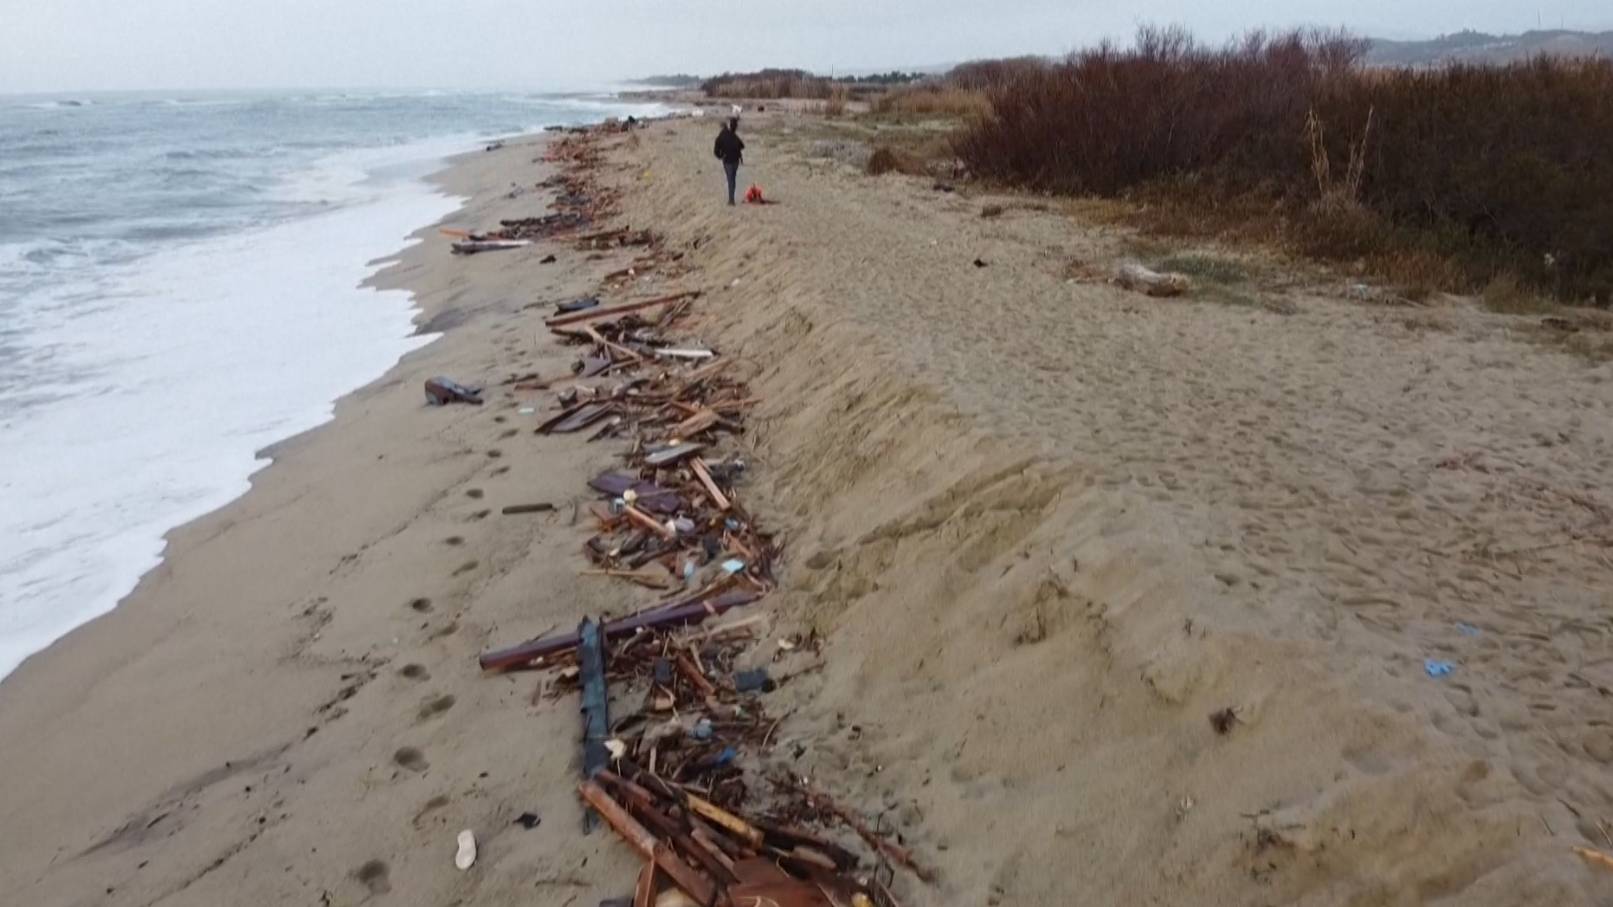 Debris from the sunken wooden boat on the shore in Calabria. /CGTN